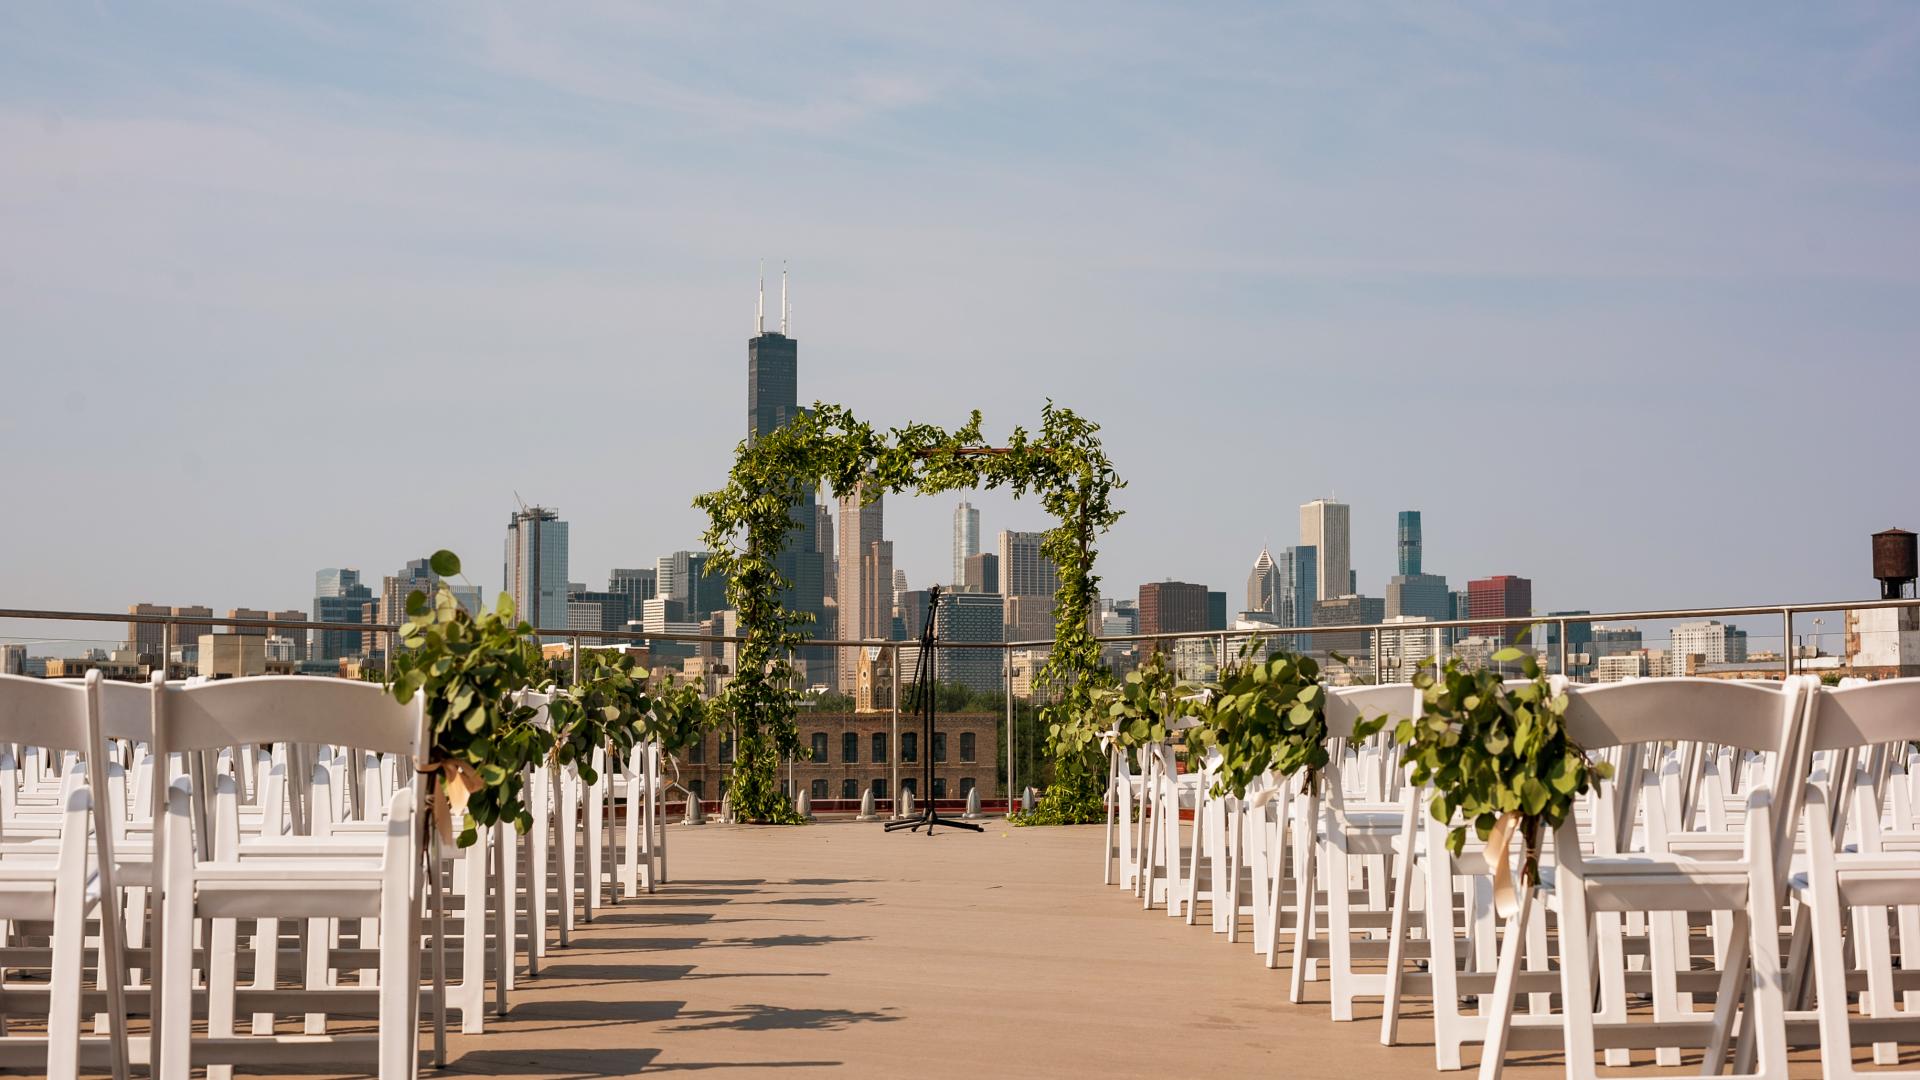 Small Outdoor Venues for Rent in Chicago, IL